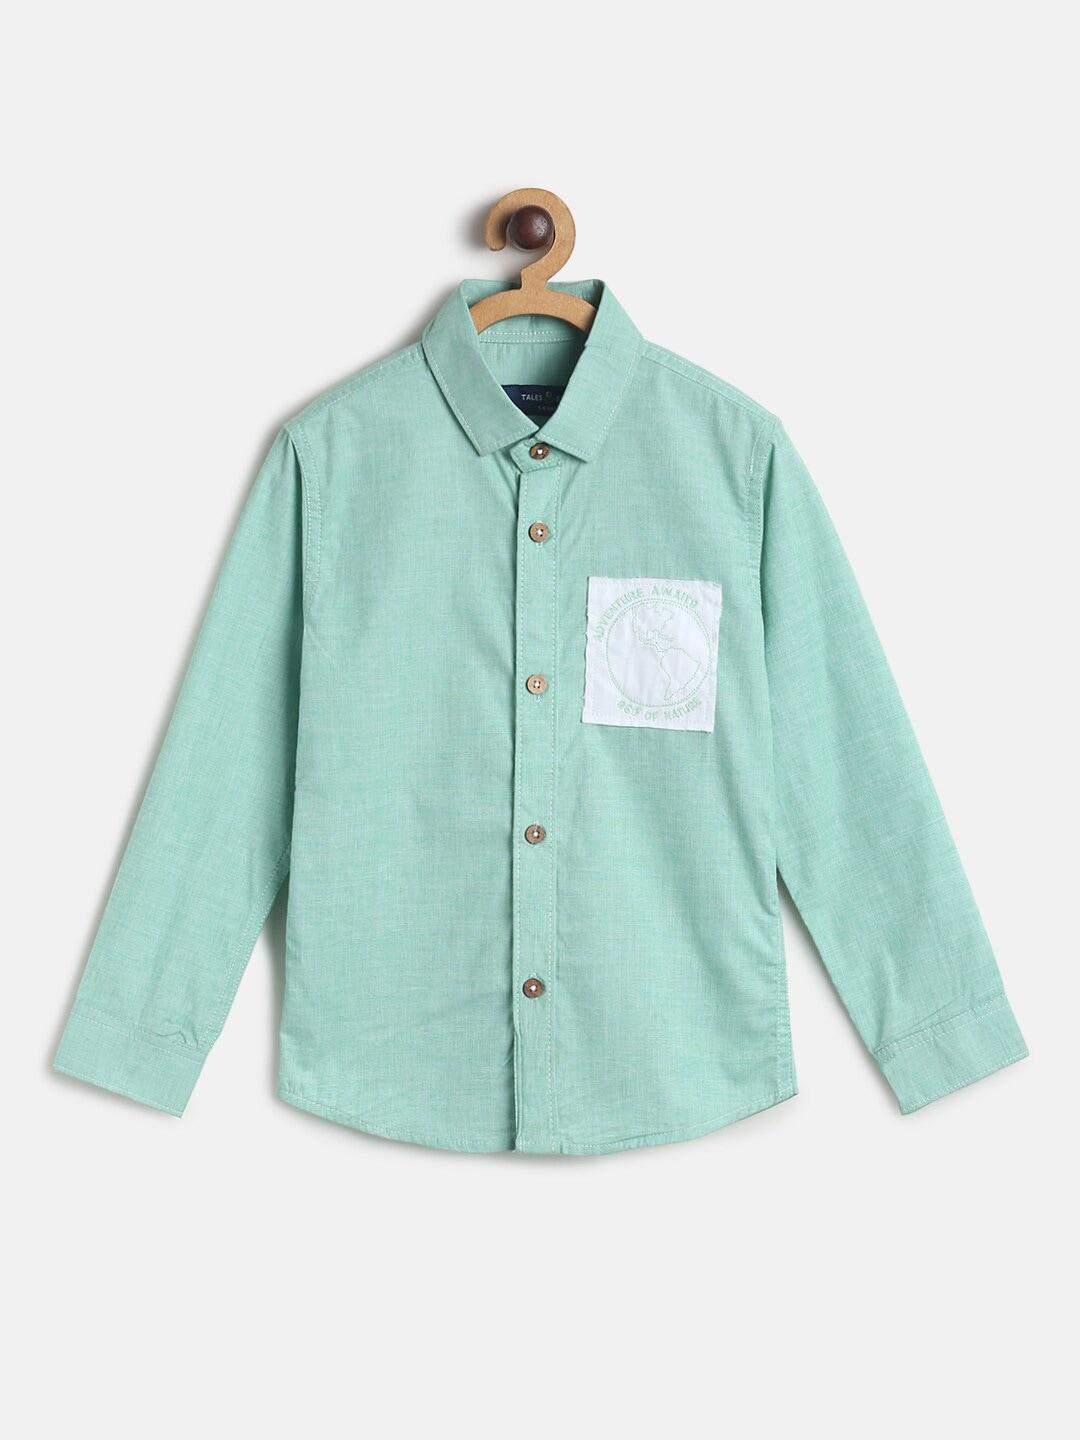 tales & stories boys green cotton long sleeve casual shirt